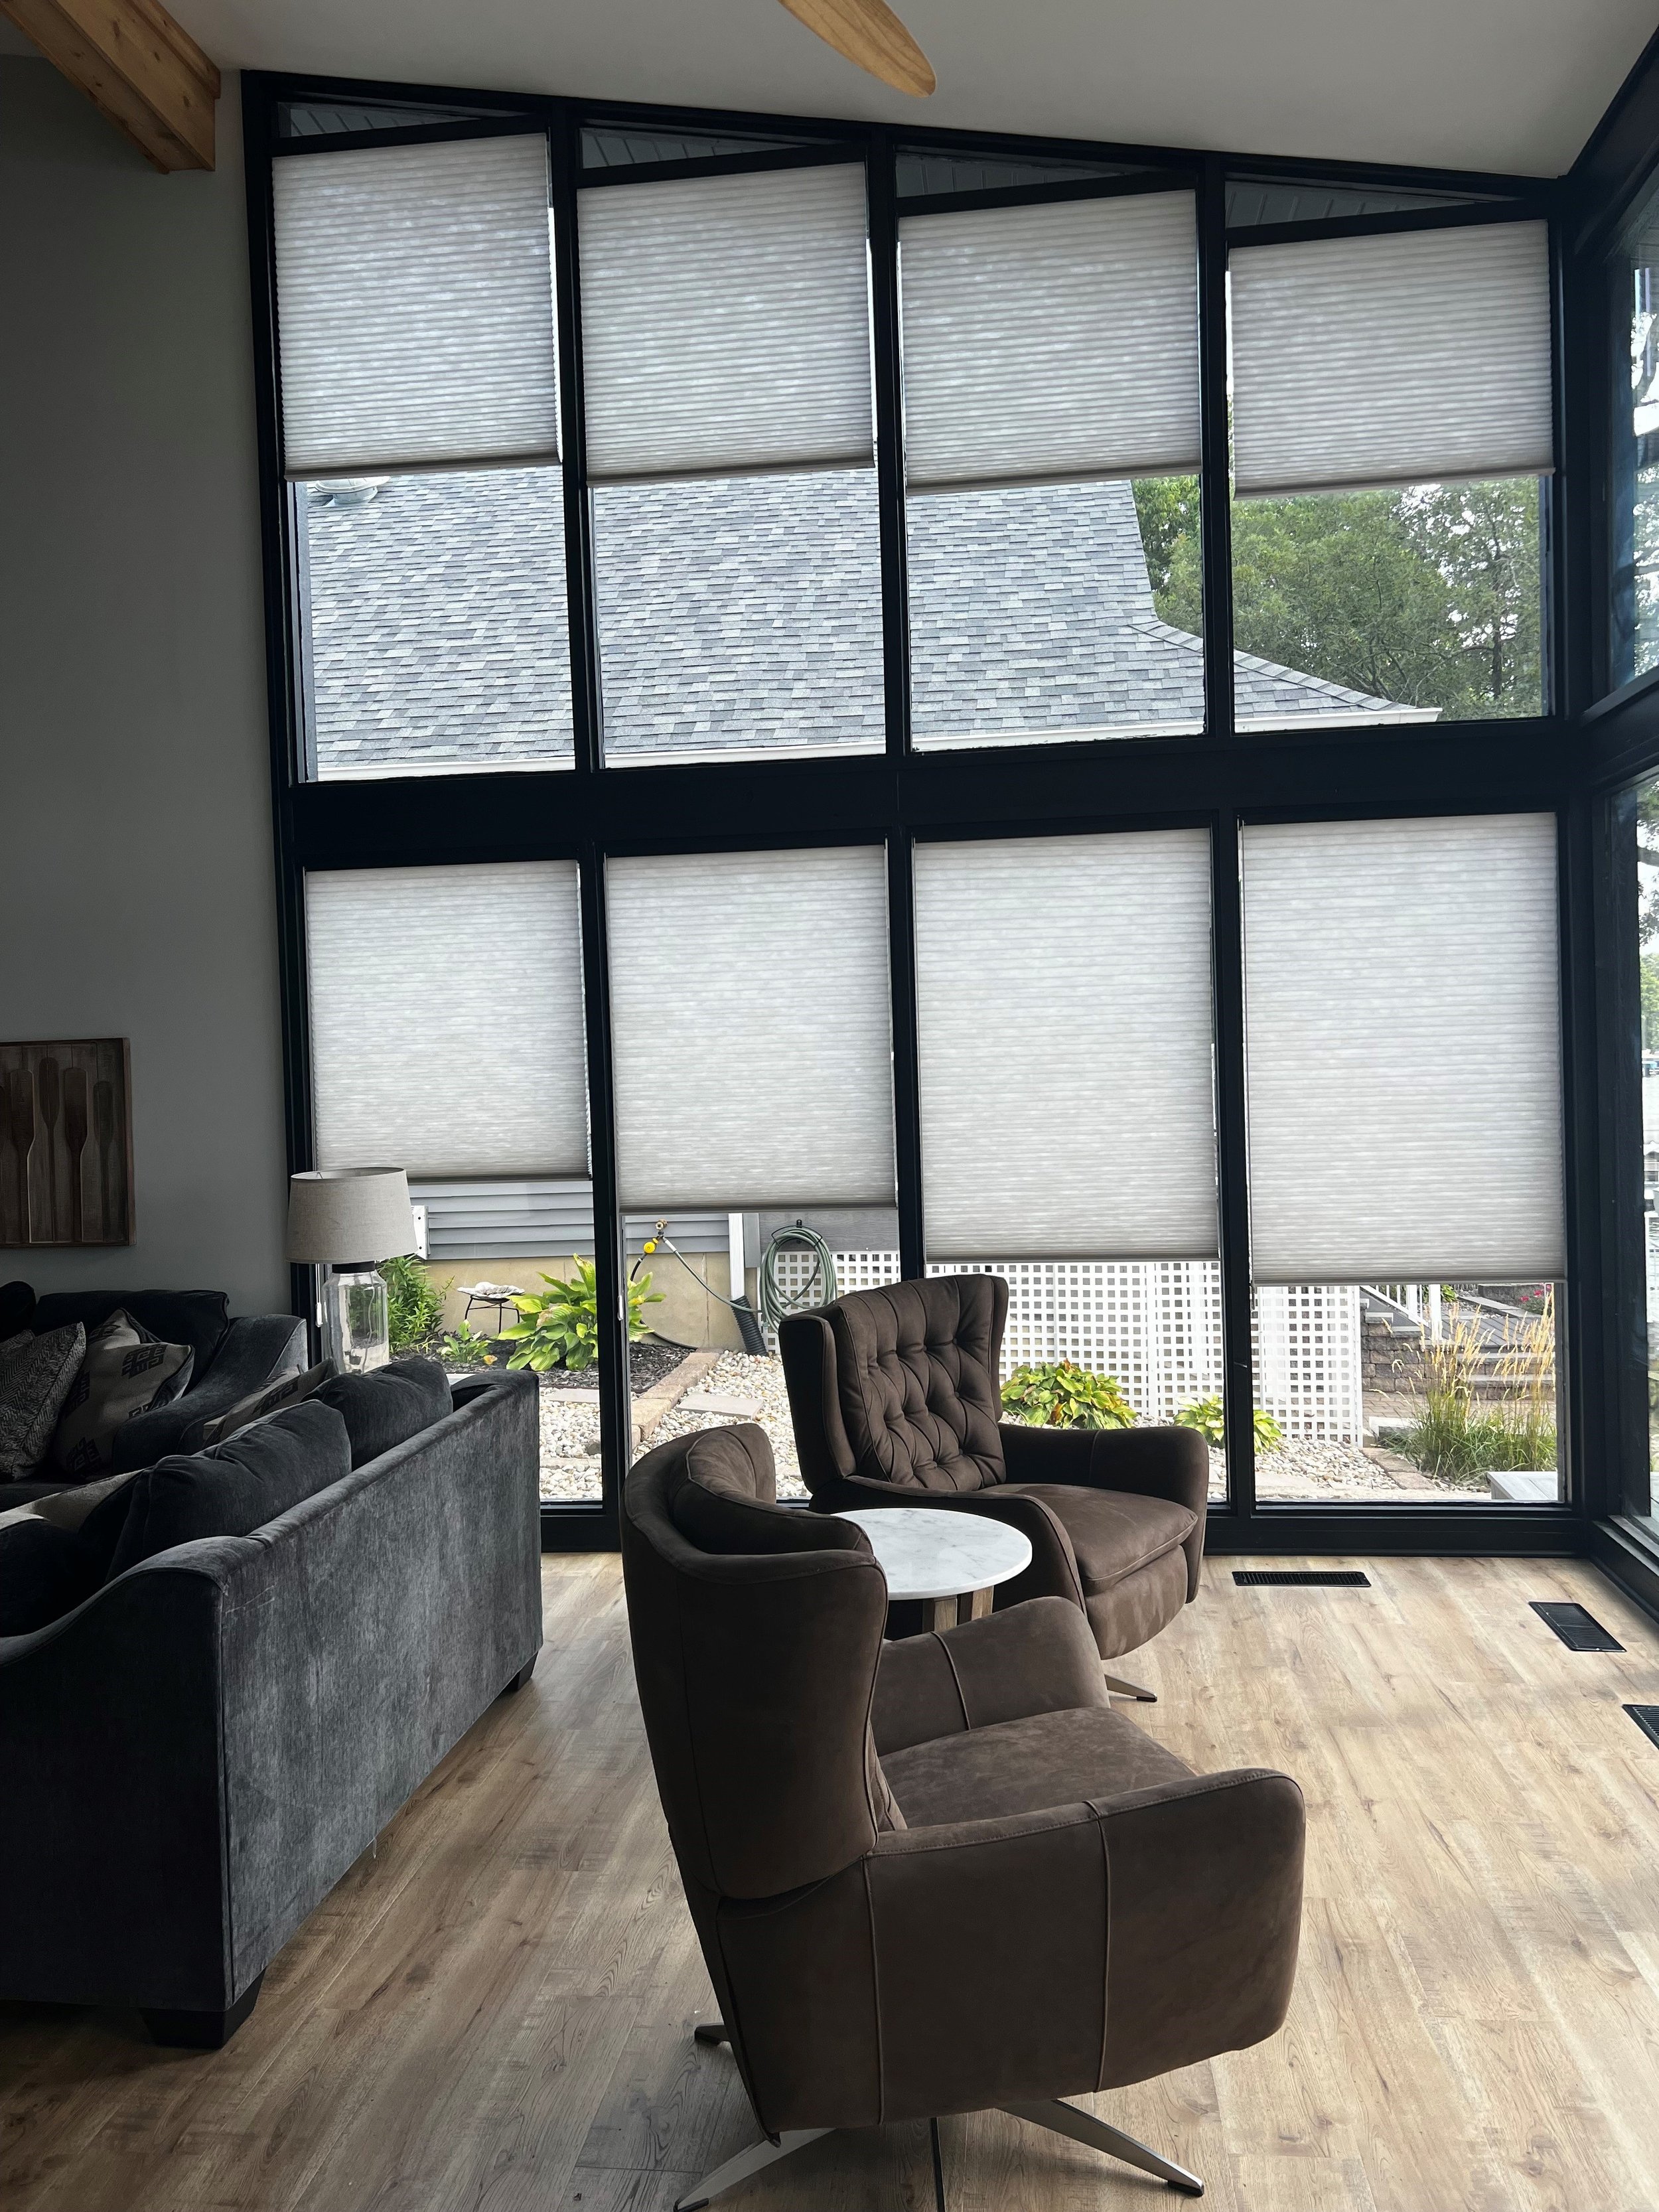  Hunter Douglas Duette® Honeycomb Shades make a great choice for those hard-to-reach windows in our customer’s beautiful home 